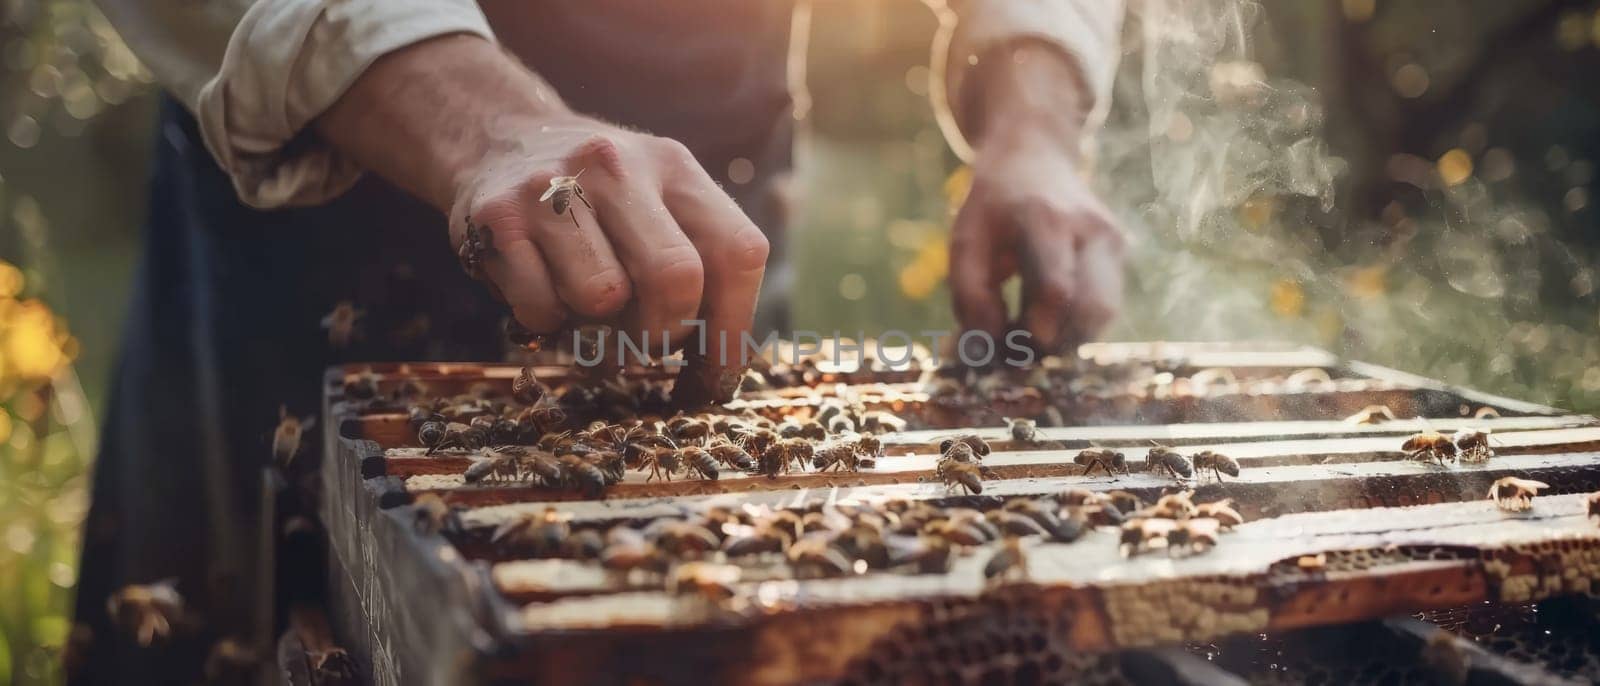 Amidst the autumnal hues, a beekeeper skillfully inspects honeycomb frames teeming with bees. The image captures the delicate balance of beekeeping and nature's cycle